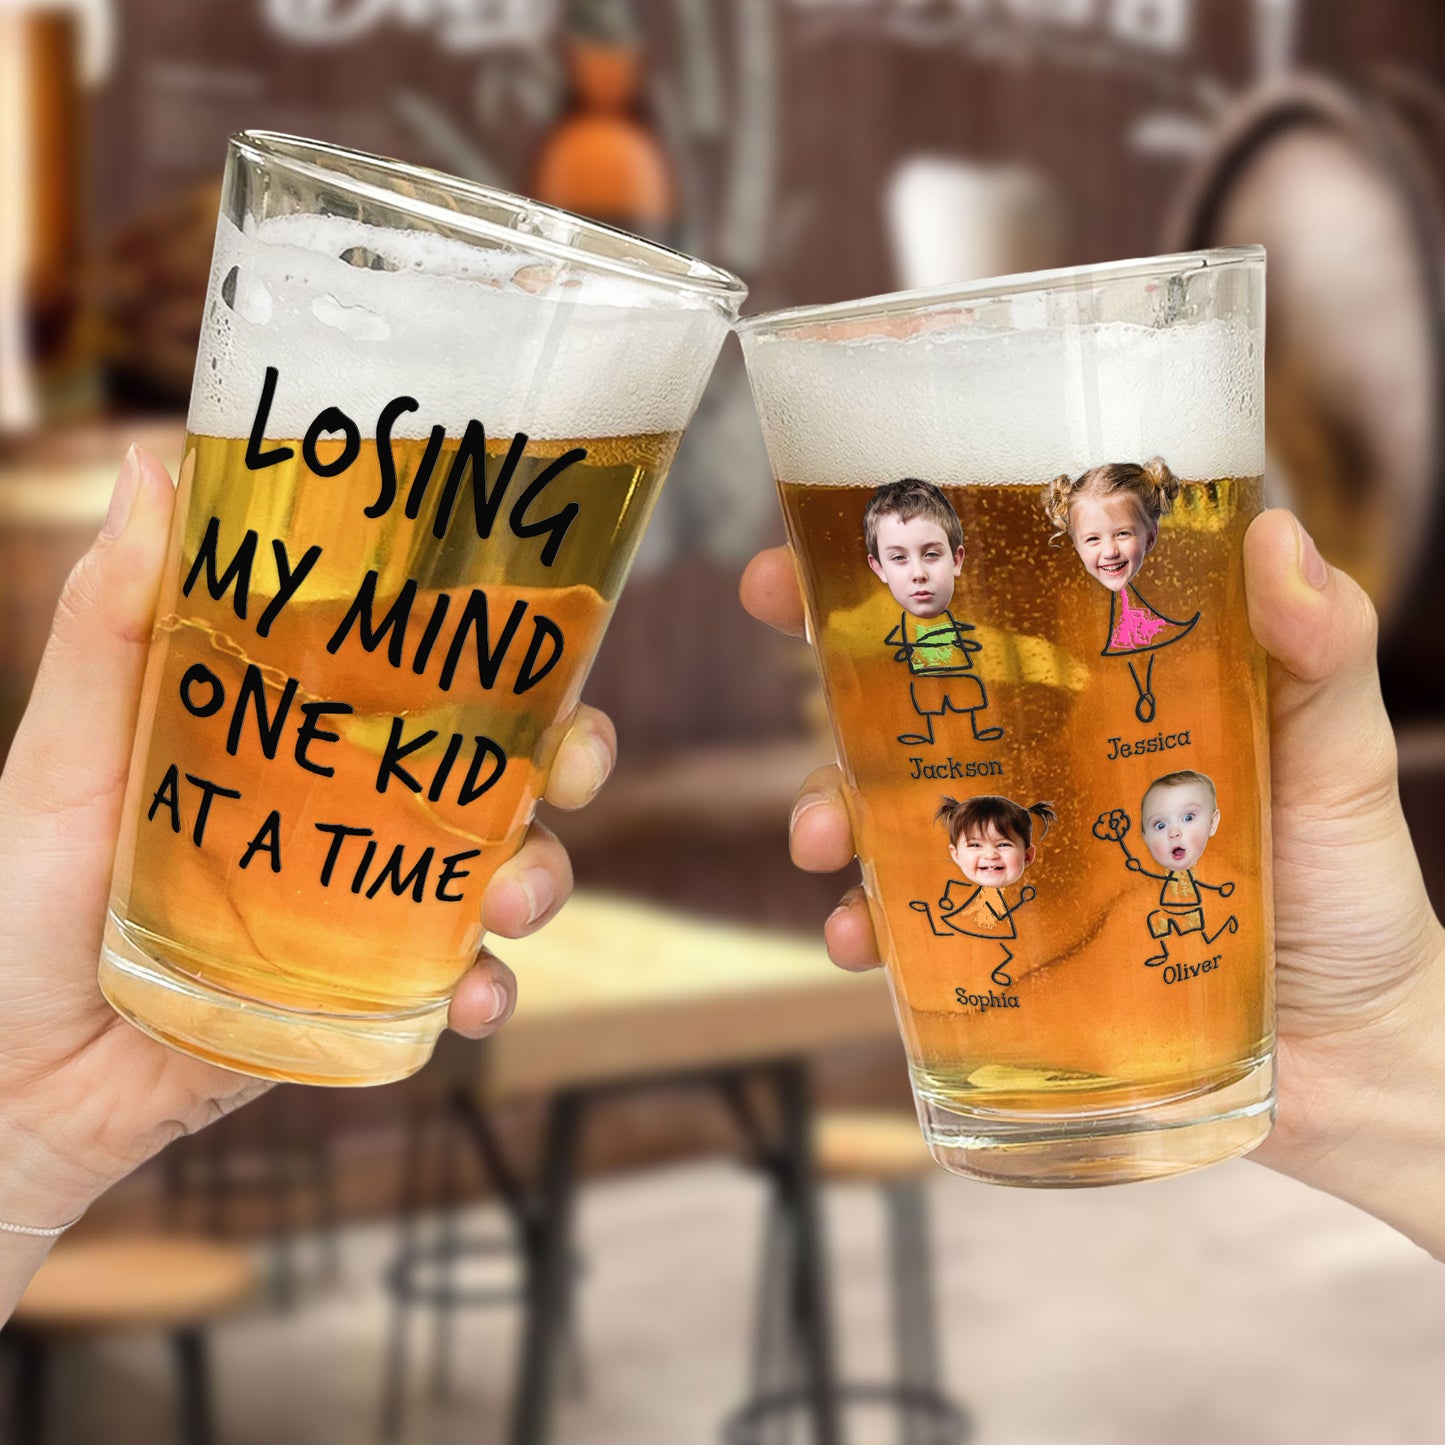 Losing My Mind One Kid At A Time - Personalized Photo Beer Glass